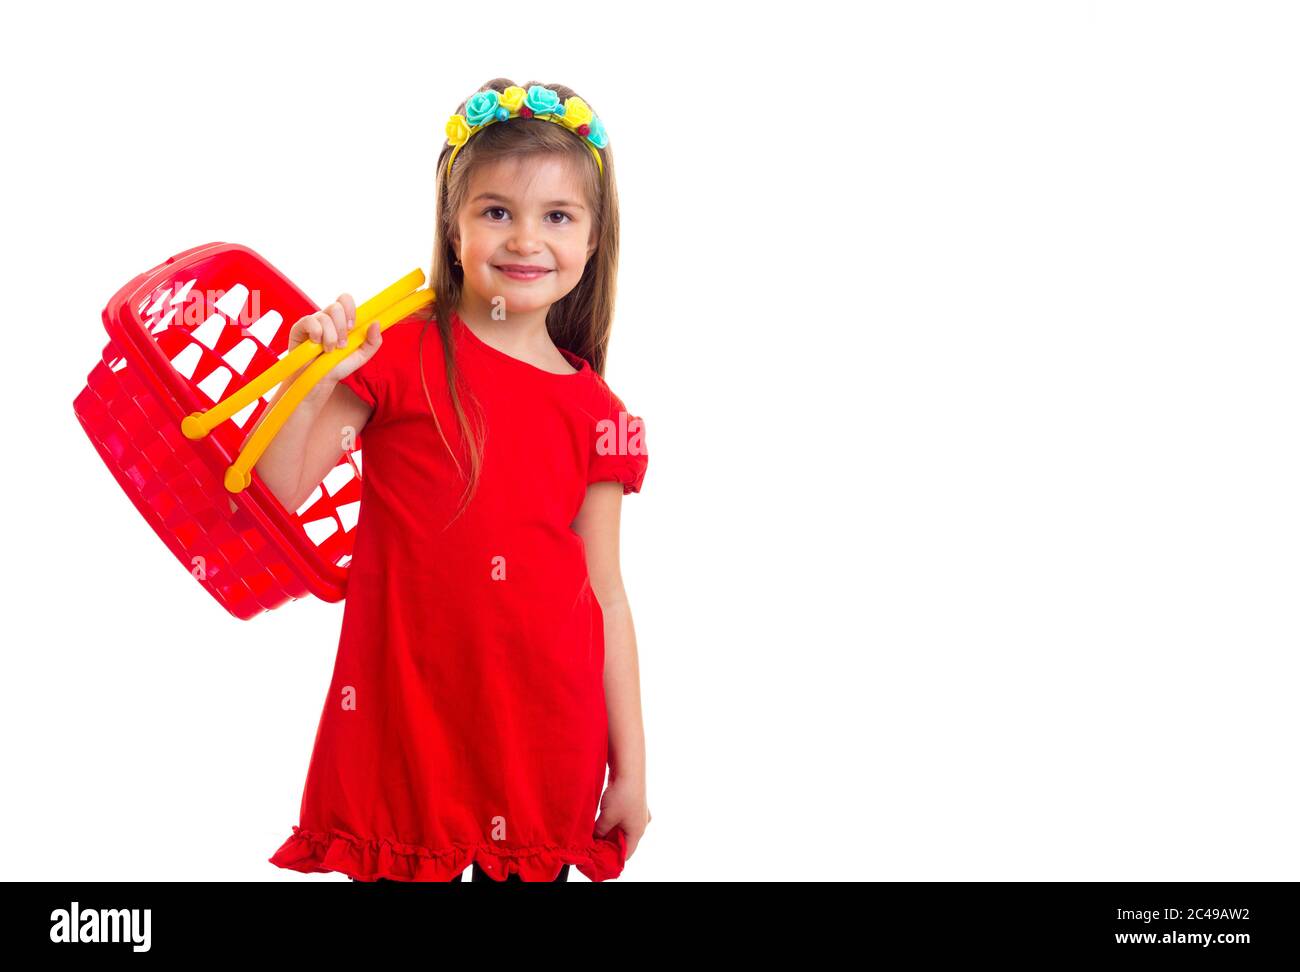 Little girl in red dress with shopping basket Stock Photo